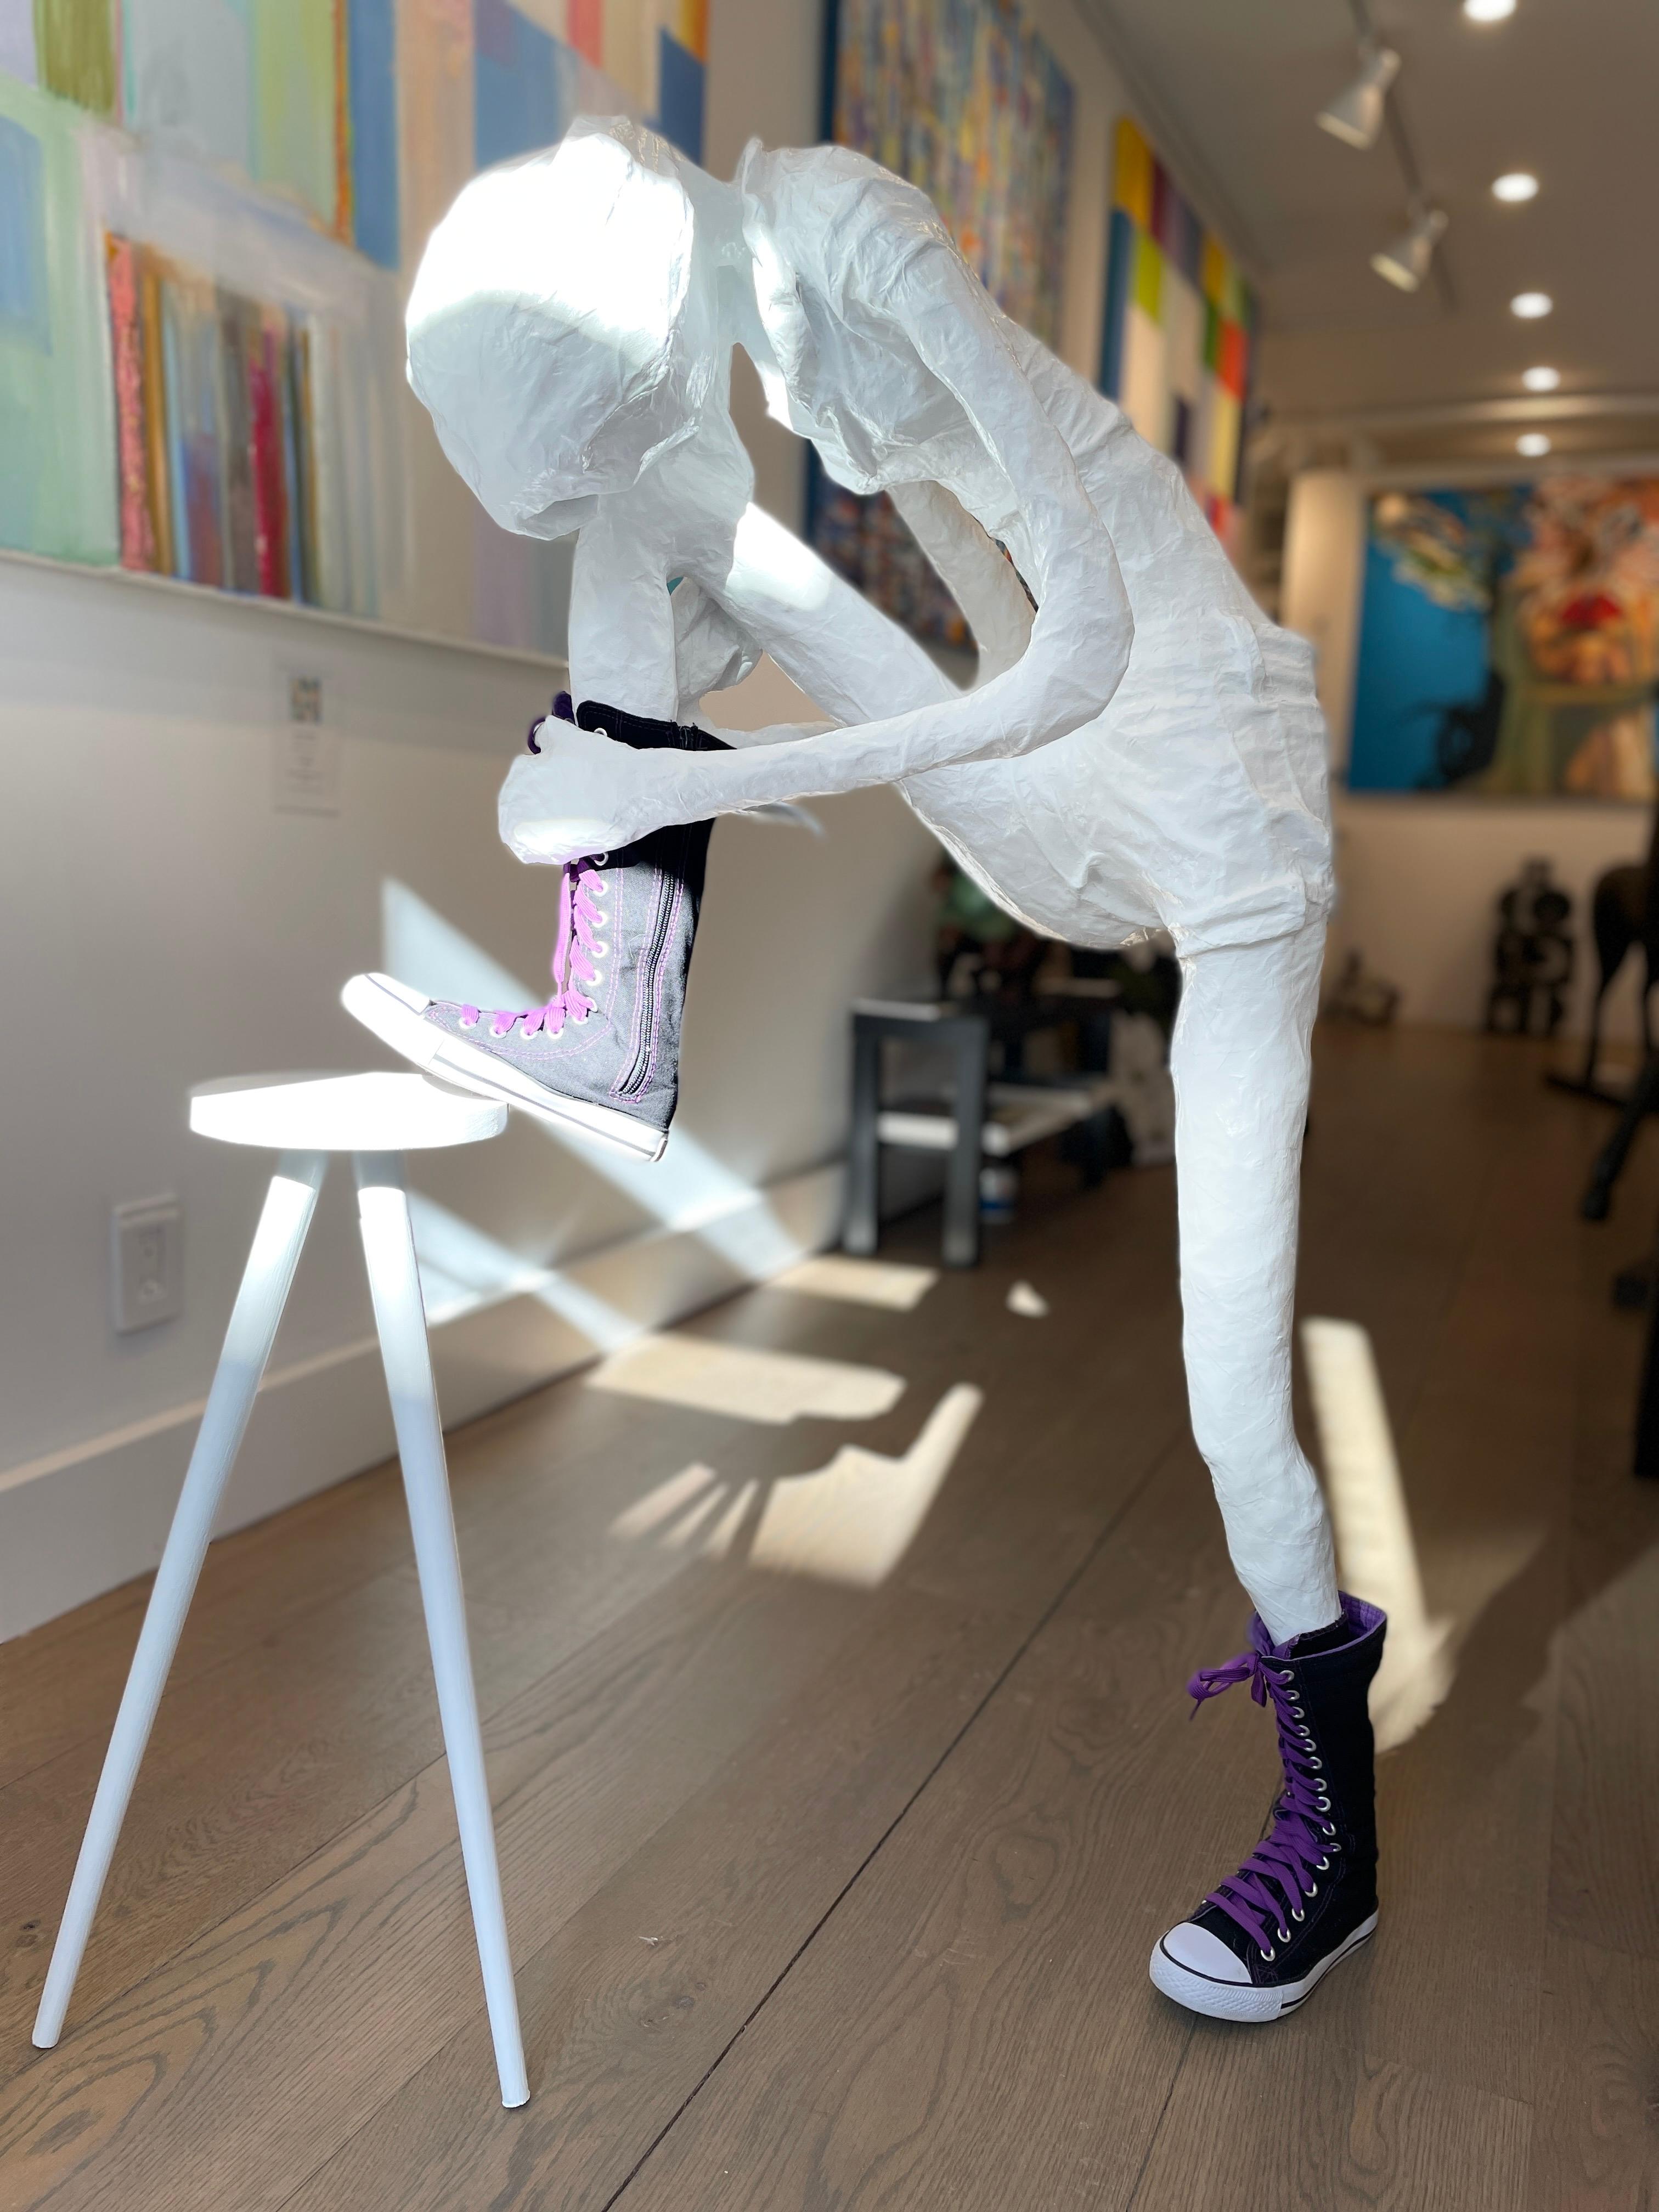 Floor Sculpture of a Girl Tying Her Shoe on a Stool. Title - Girl Tying Her Shoe - Brown Figurative Sculpture by Bret Reilly